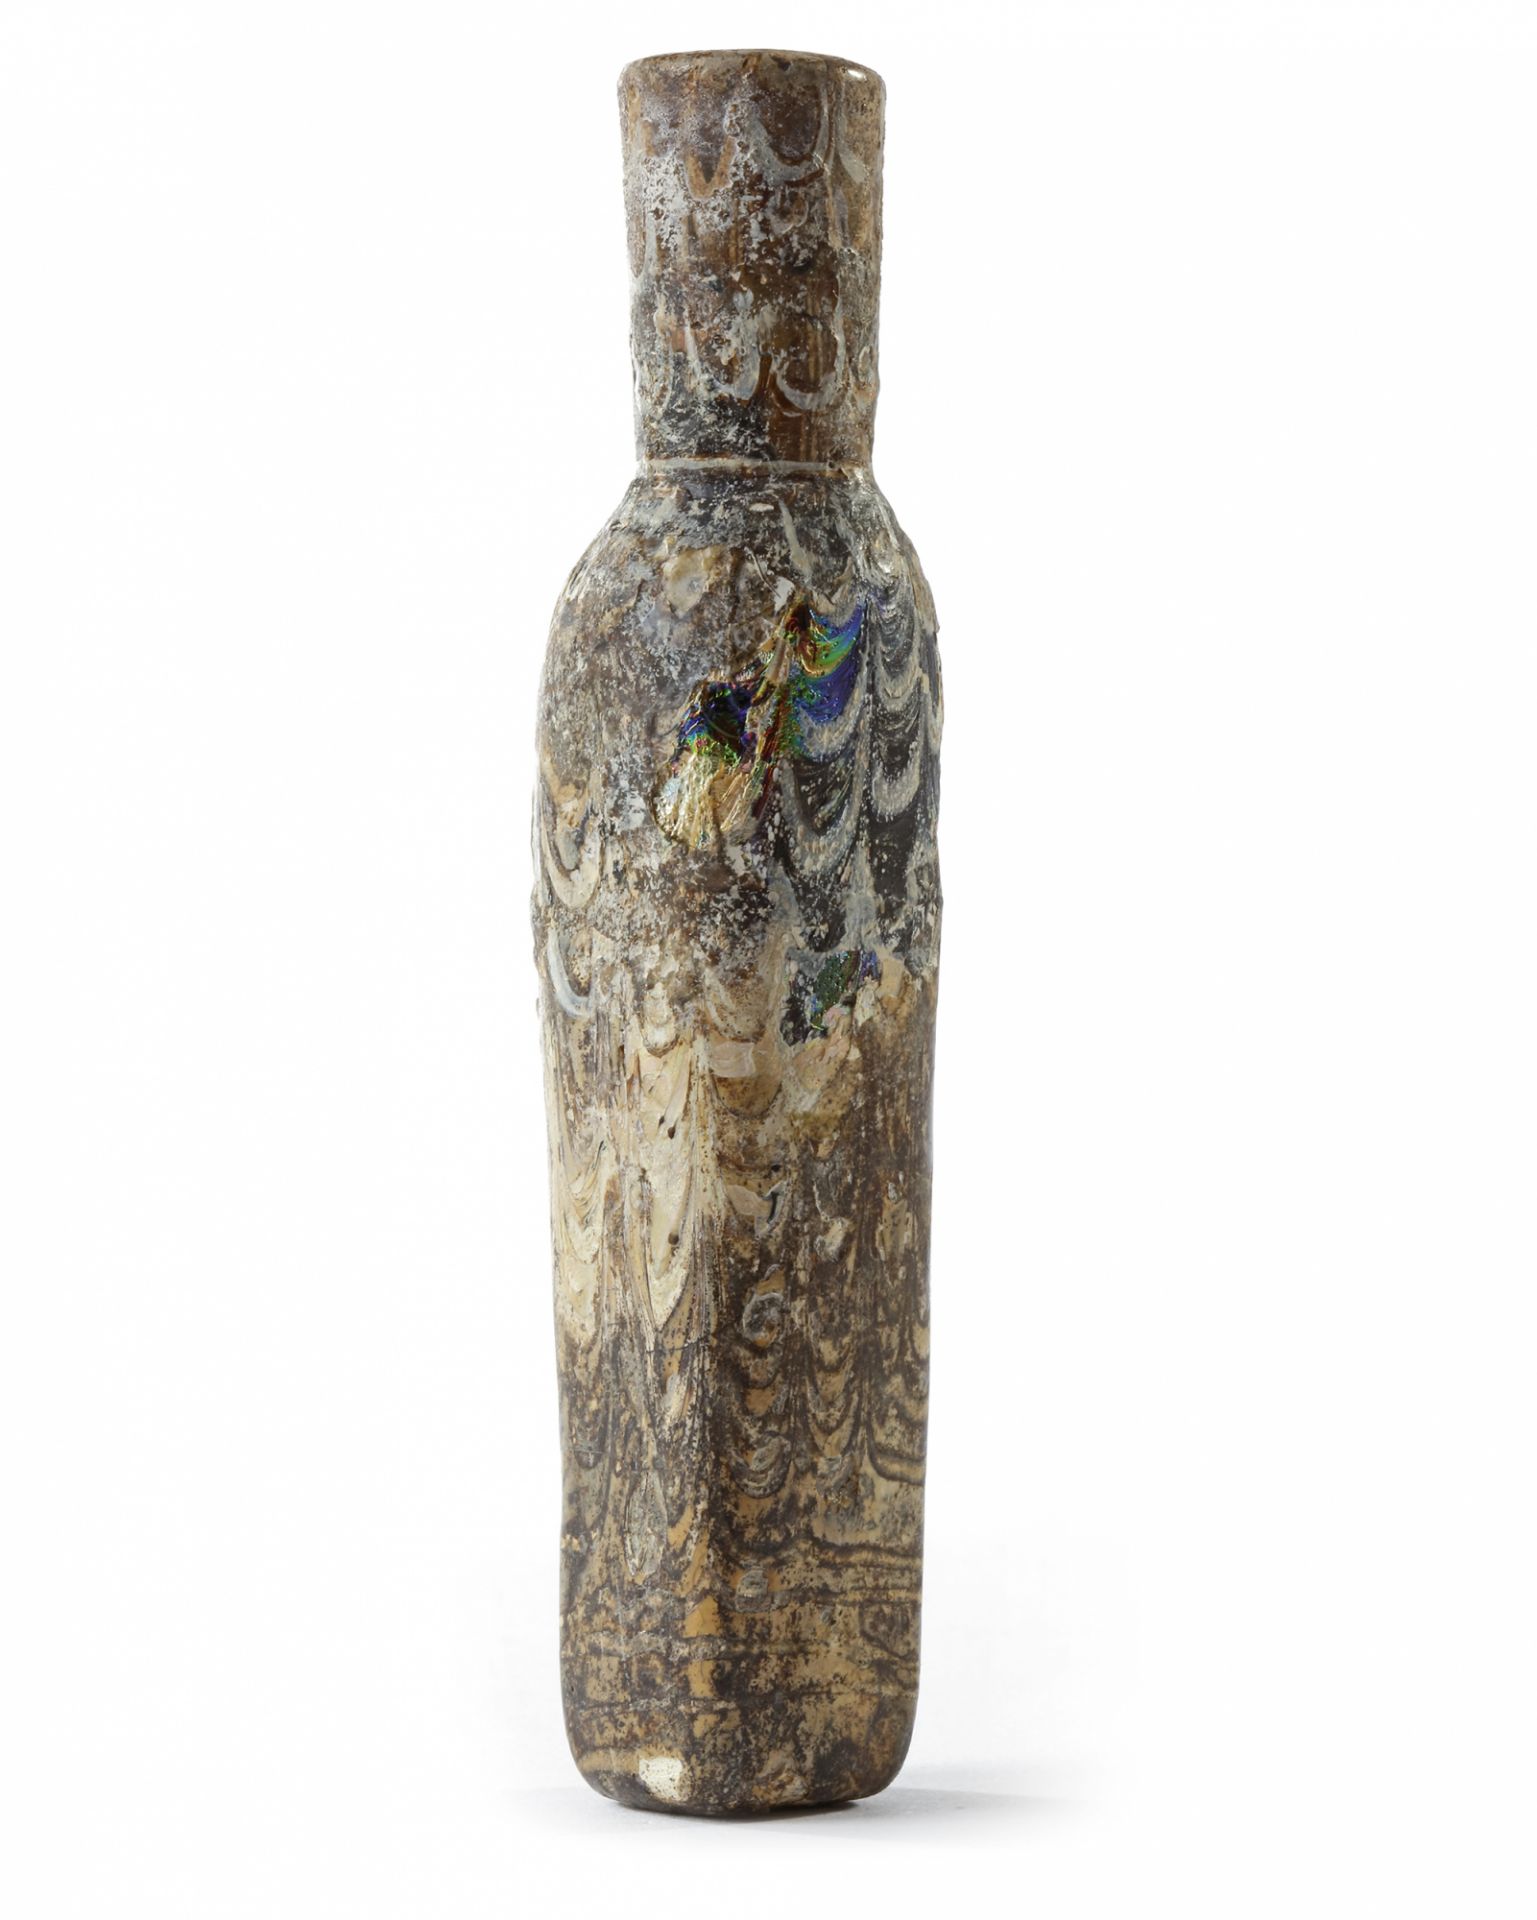 AN EARLY ISLAMIC GLASS BOTTLE EGYPT OR SYRIA, 7TH-8TH CENTURY - Image 4 of 5